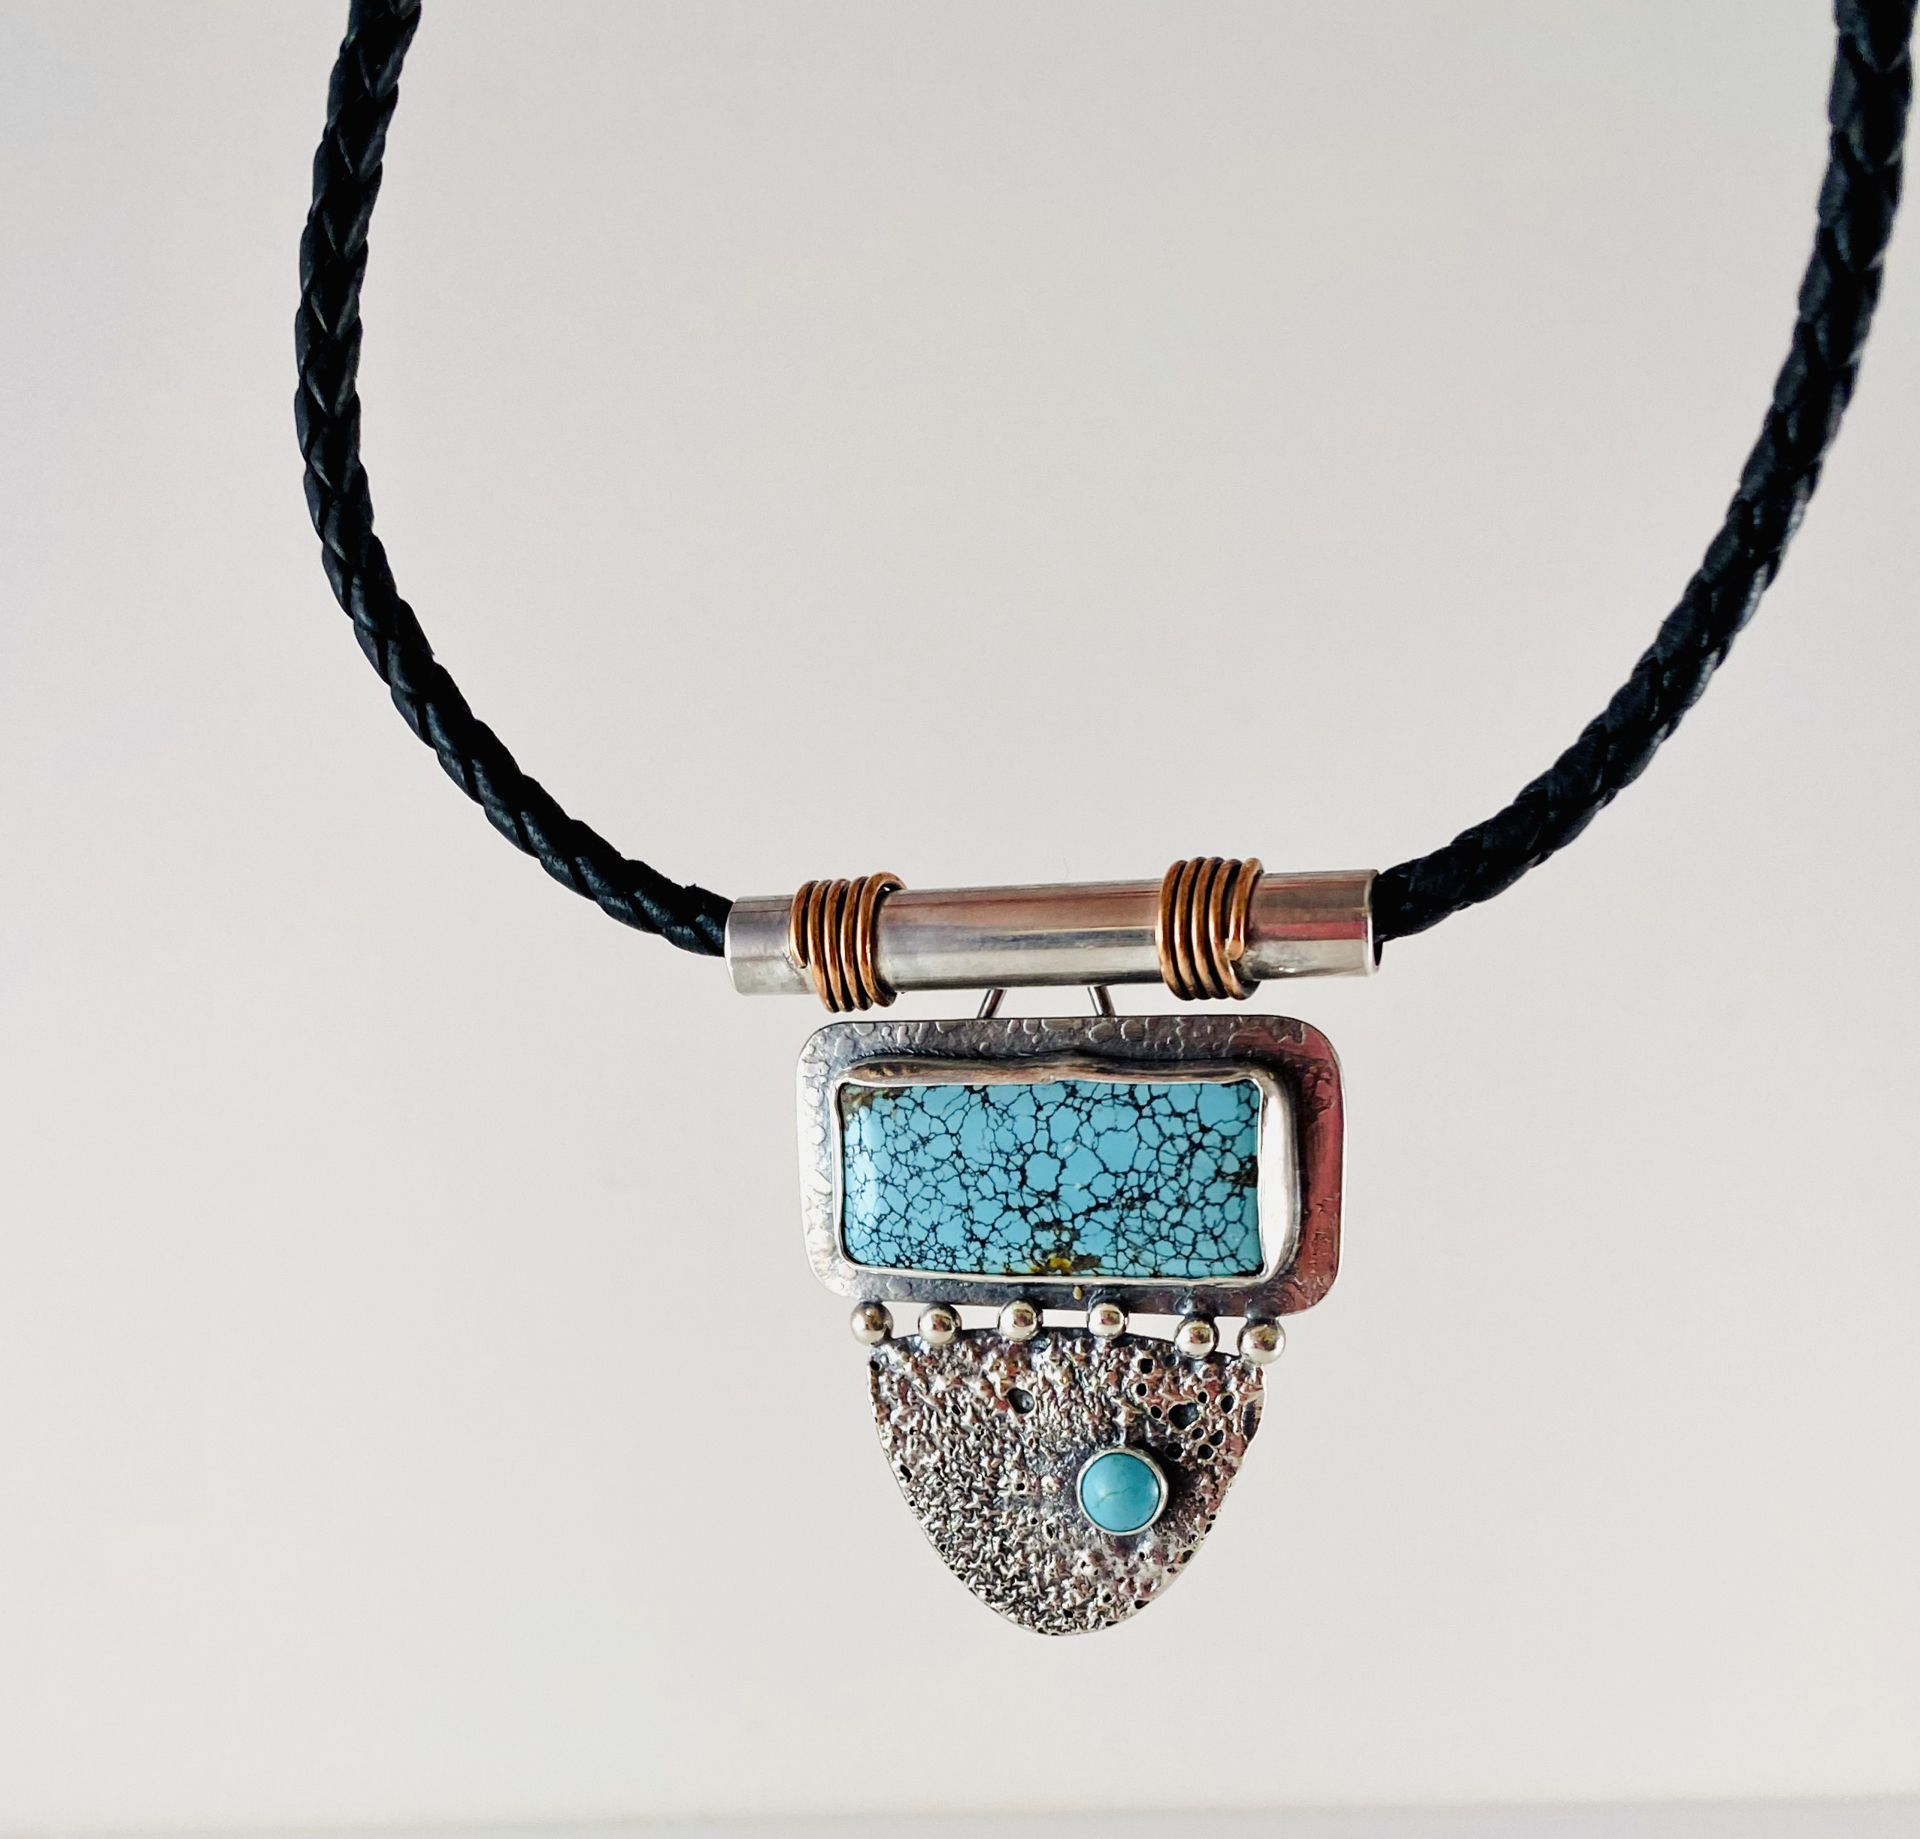 American Turquoise, Reticulated Silver, Copper Accents Pendant, 18" Braided Leather Necklace  by Anne Bivens